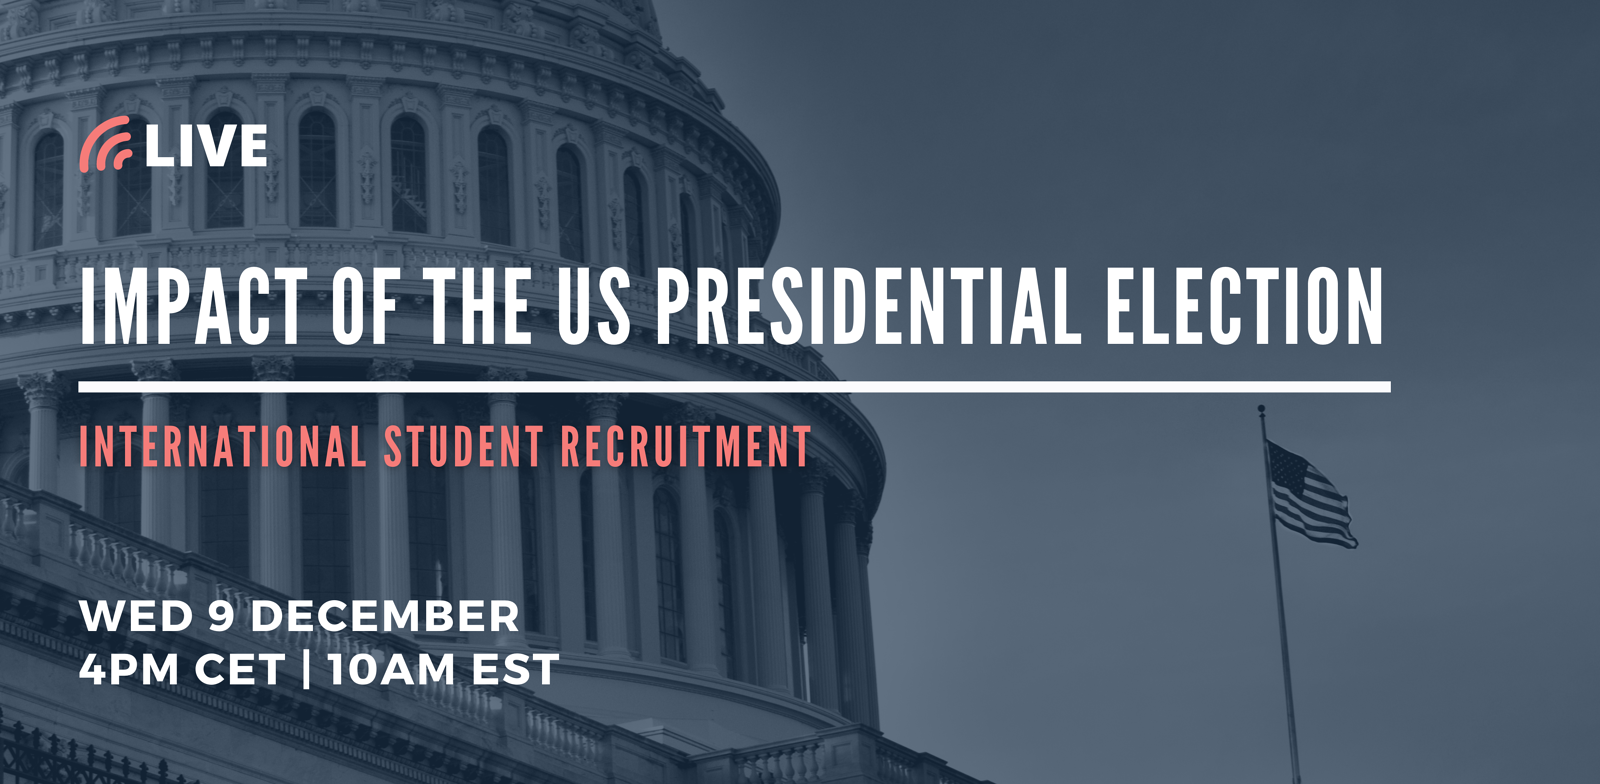 JOIN THE CONVERSATION! Impact of the US Presidential Election on International Student Recruitment